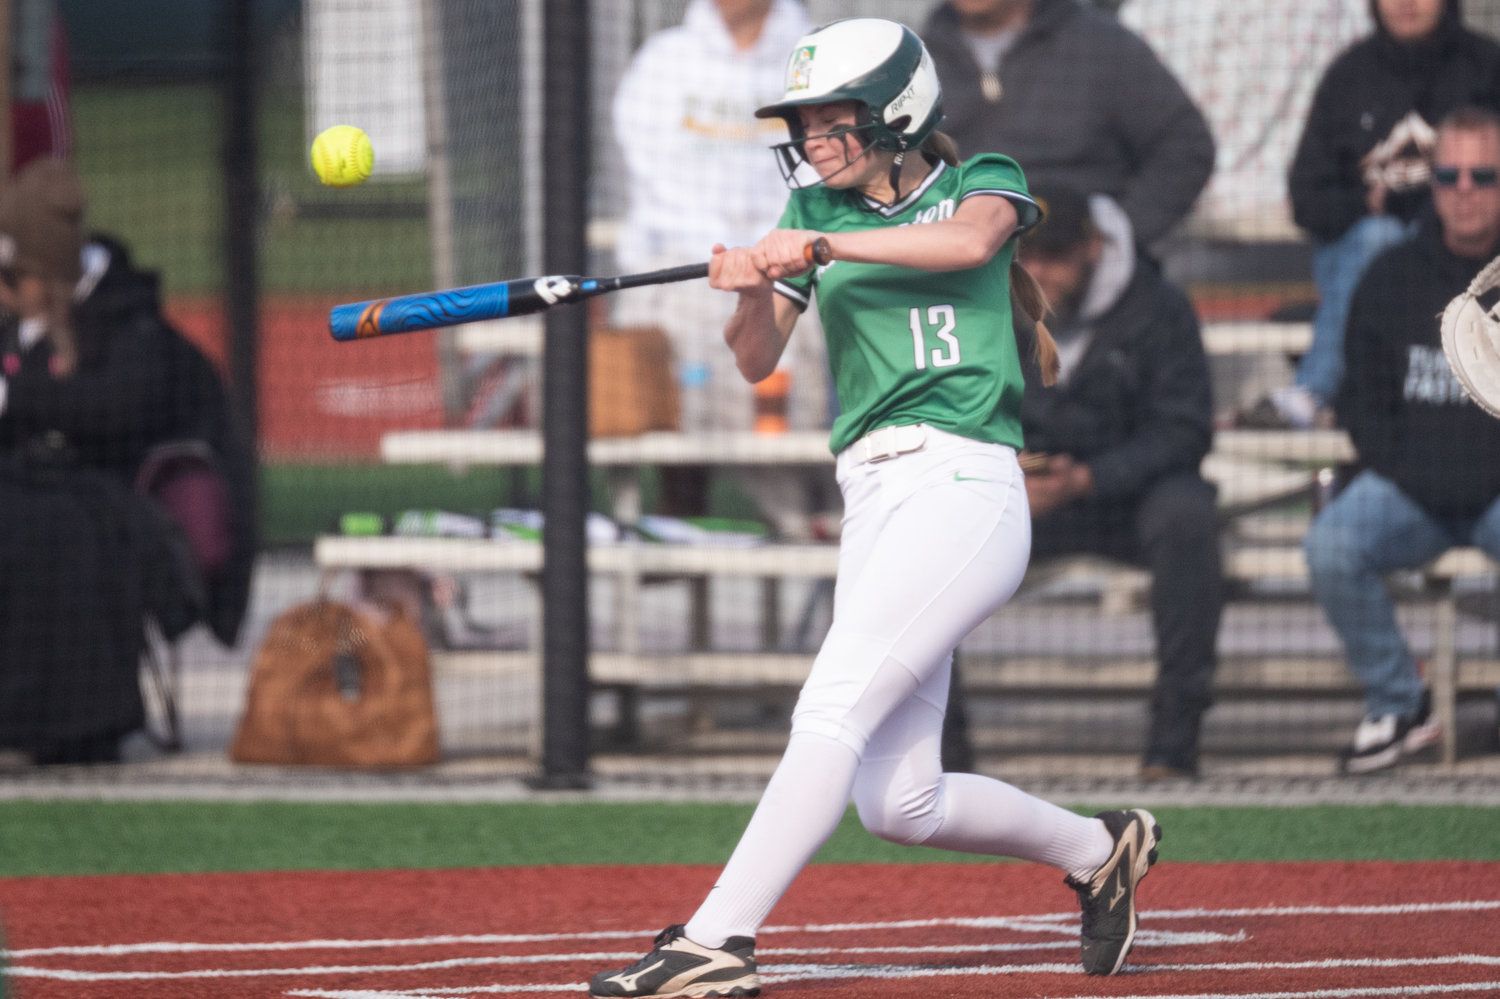 Tumwater Aly Waltermeyer swings at a pitch against W.F. West at Recreation Park in Chehalis April 15.